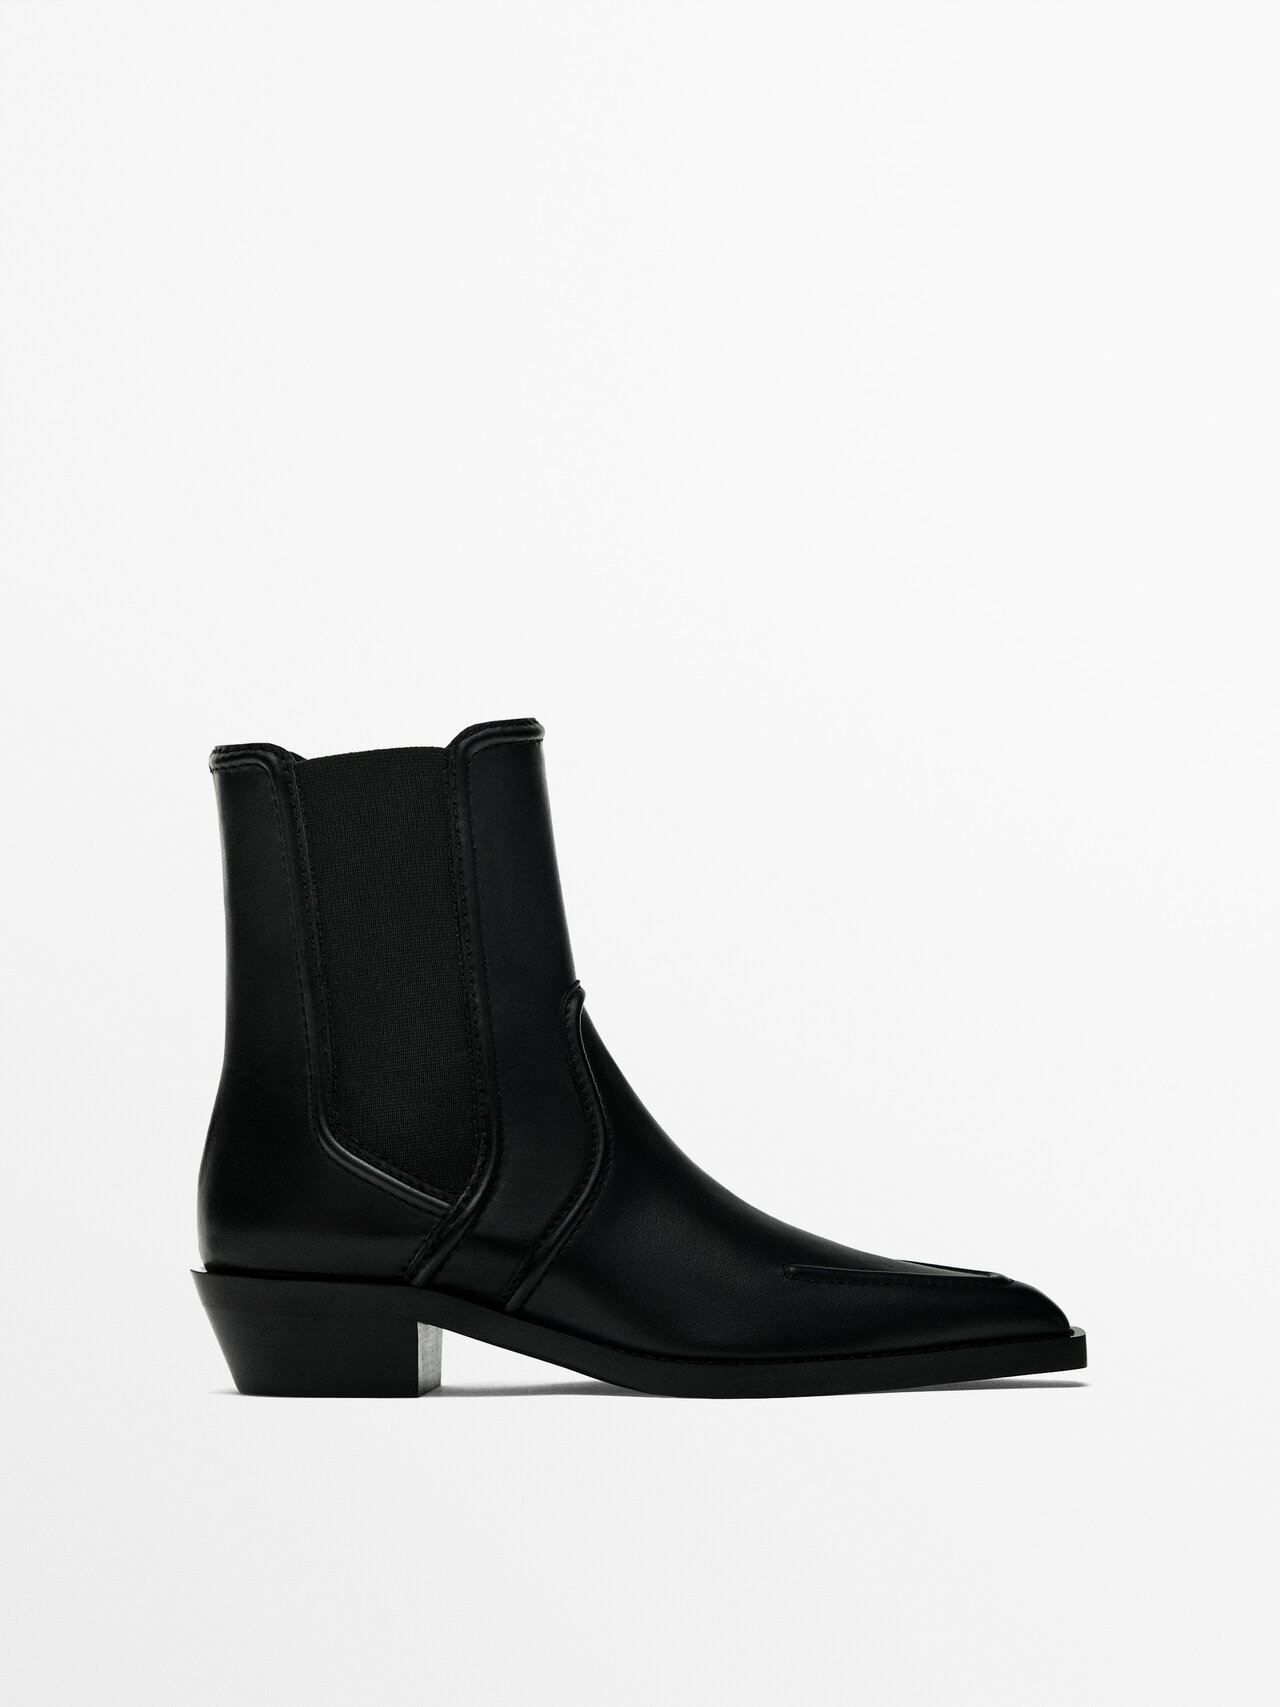 Massimo Dutti Moc Toe Heeled Ankle Boots In Black